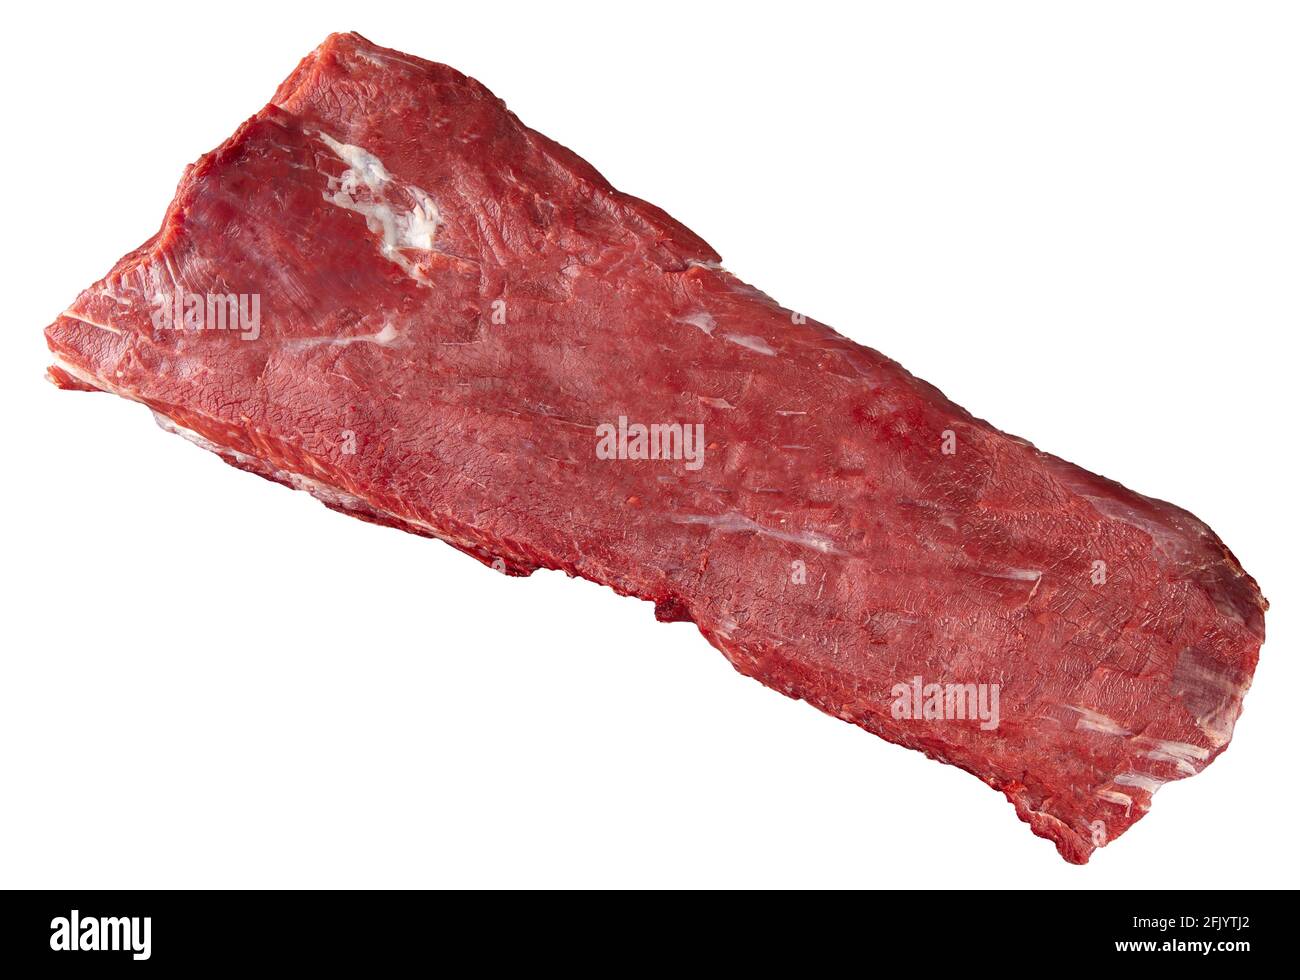 Isolated beef loin meat part on white background Stock Photo